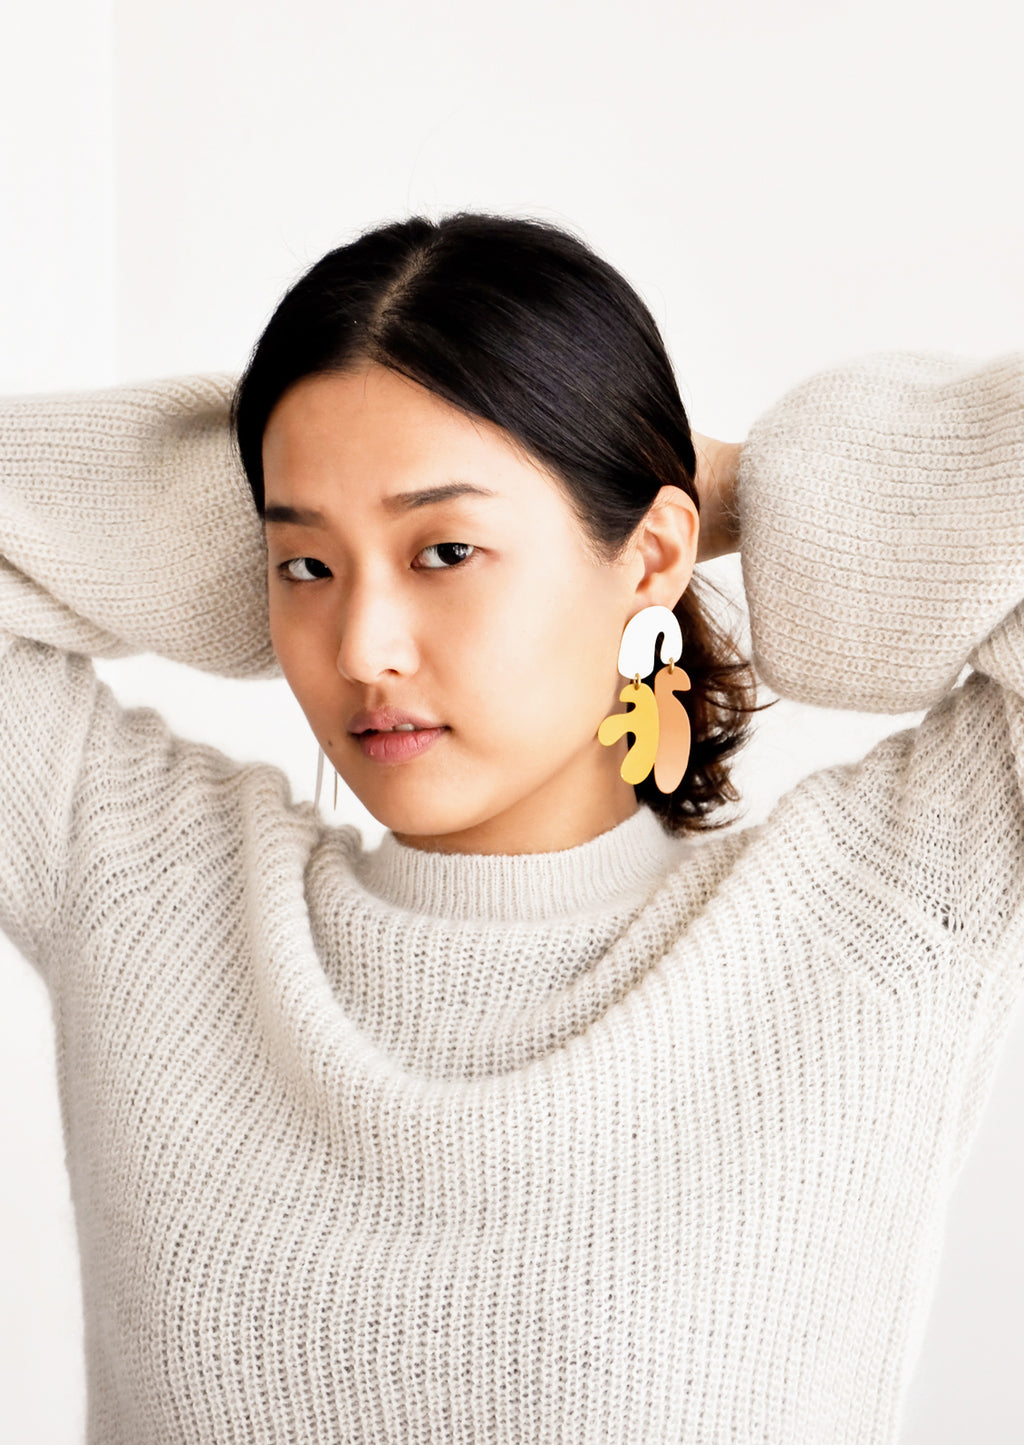 2: Model shot of woman wearing earrings and white sweater.